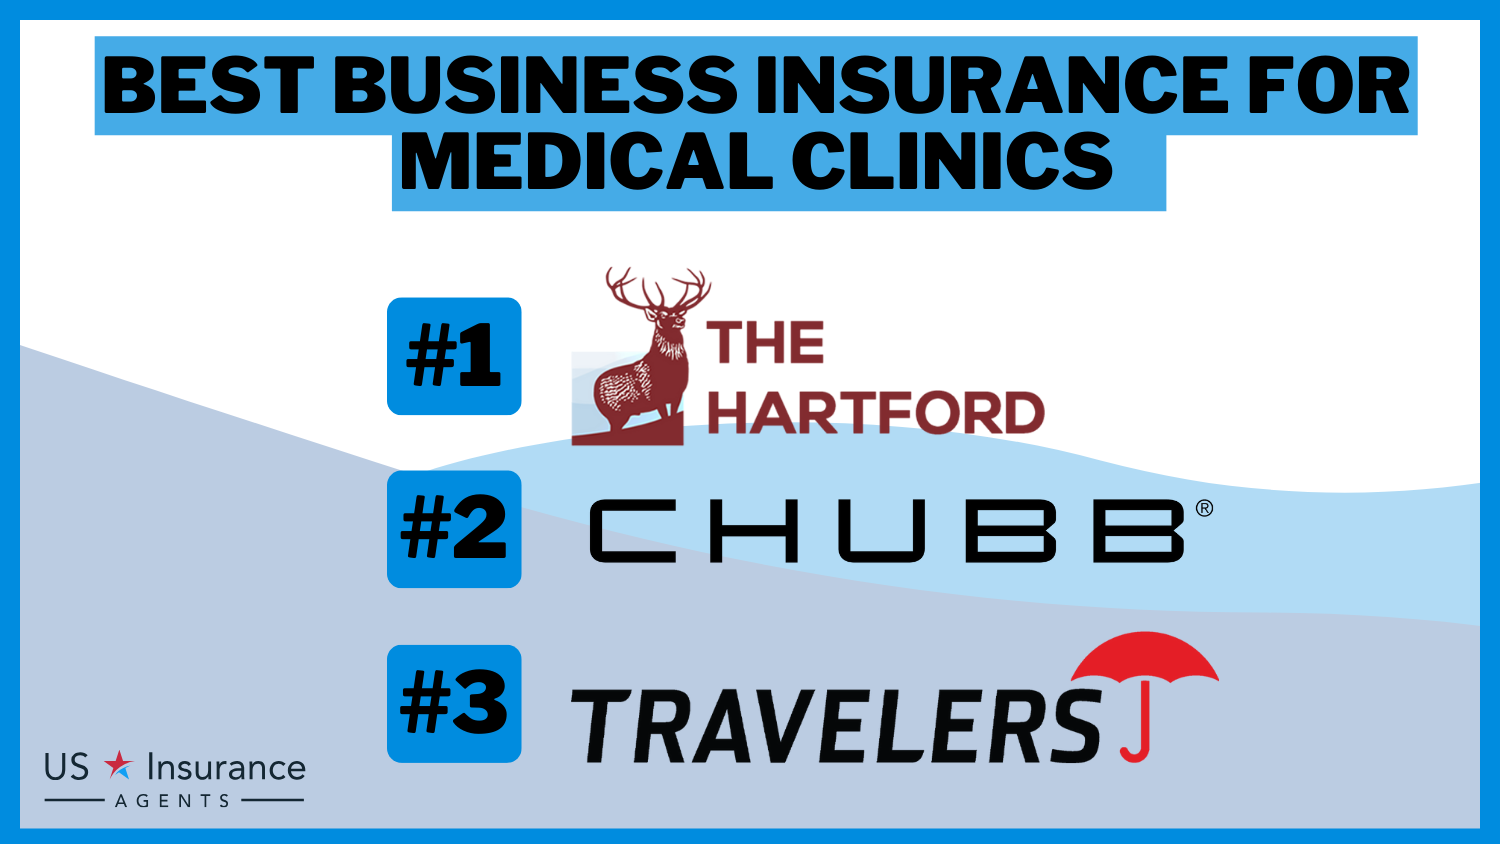 3 Best Business Insurance for Medical Clinics: The Hartford, Chubb and Travelers.